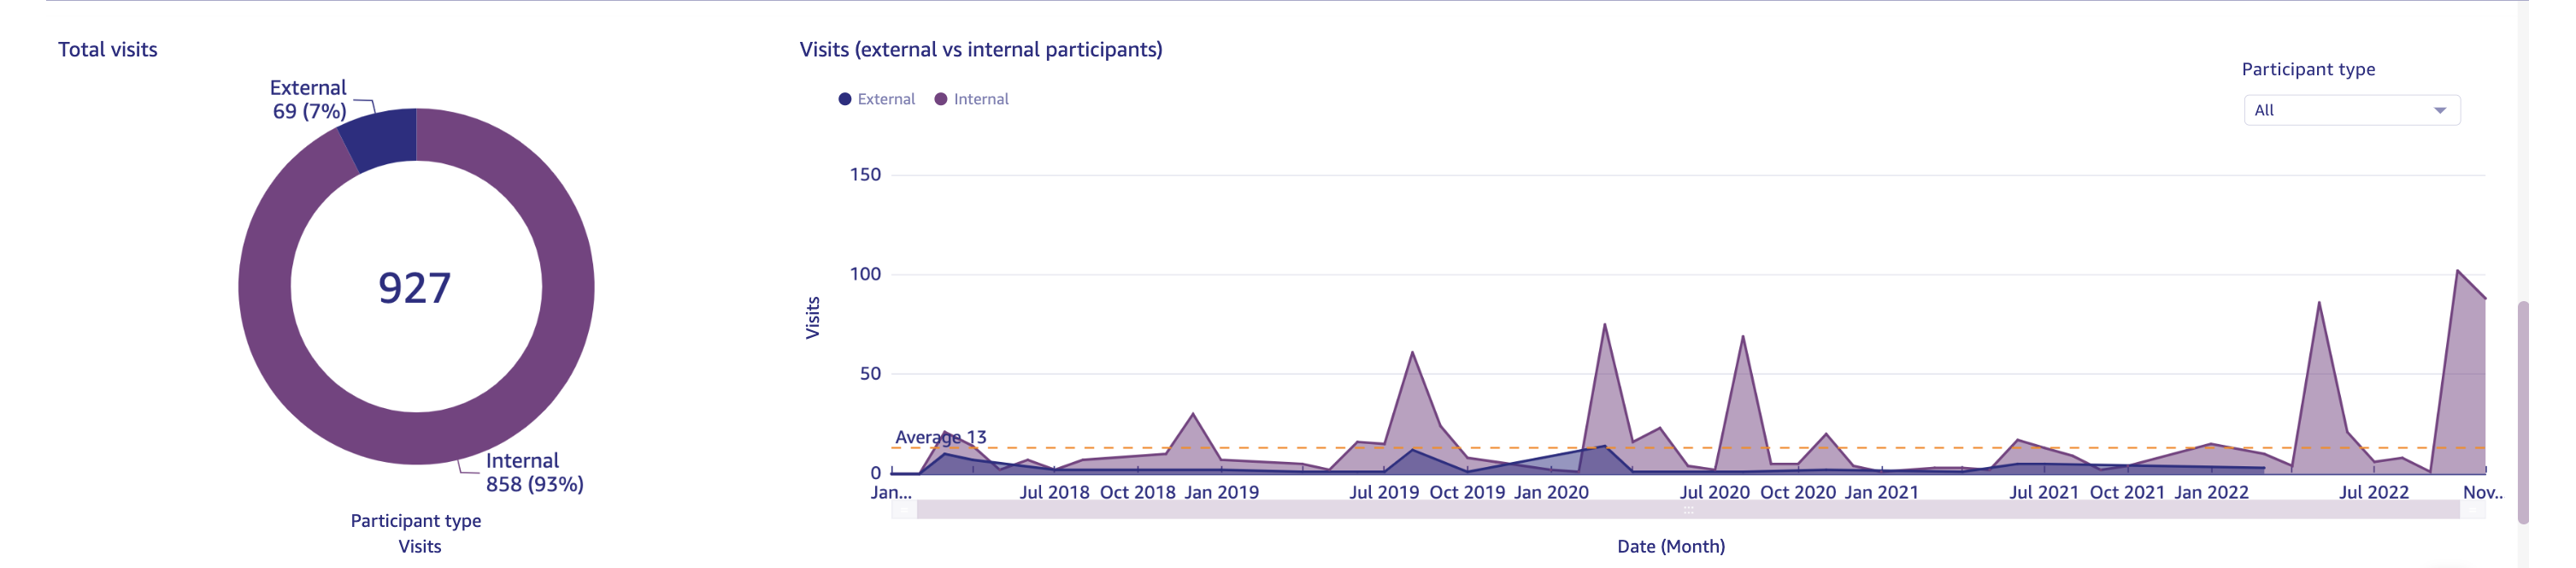 Shared_Spaces_Engagement_Reports_7_-_Total_Visits.png